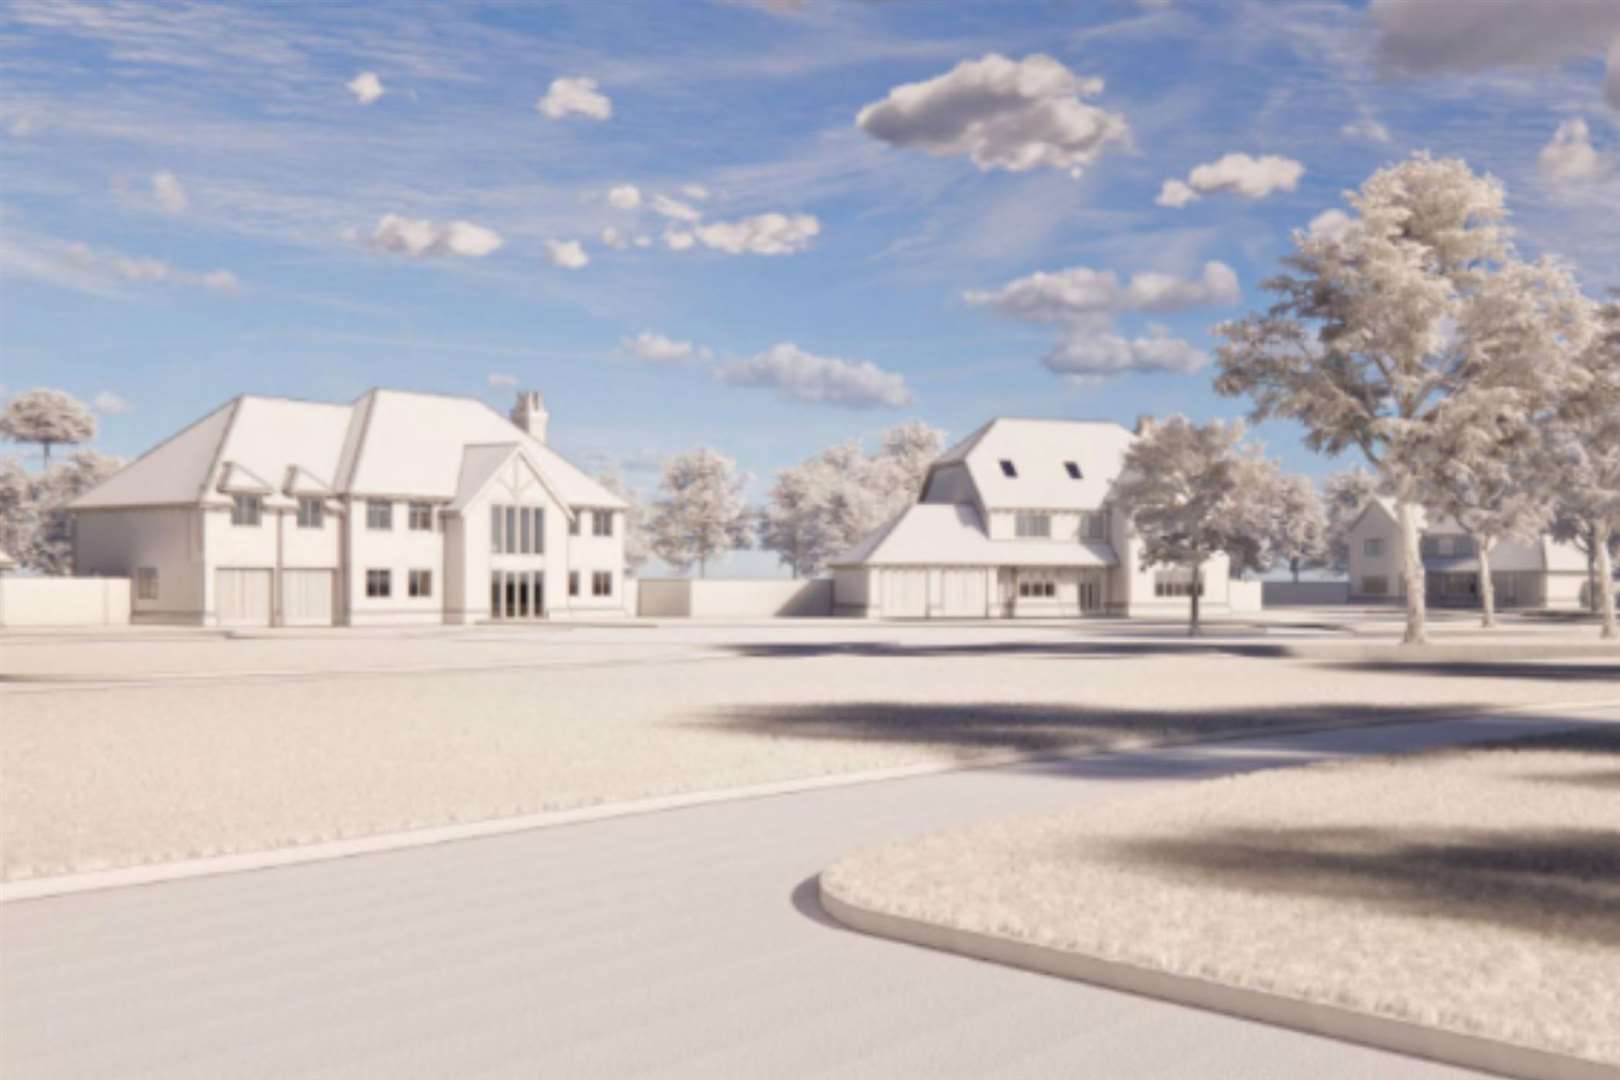 Plans have been put forward for 10 houses to be built on the former golf complex in Great Chart near Ashford. Picture: Building Design Studio/Ashford Borough Council planning website